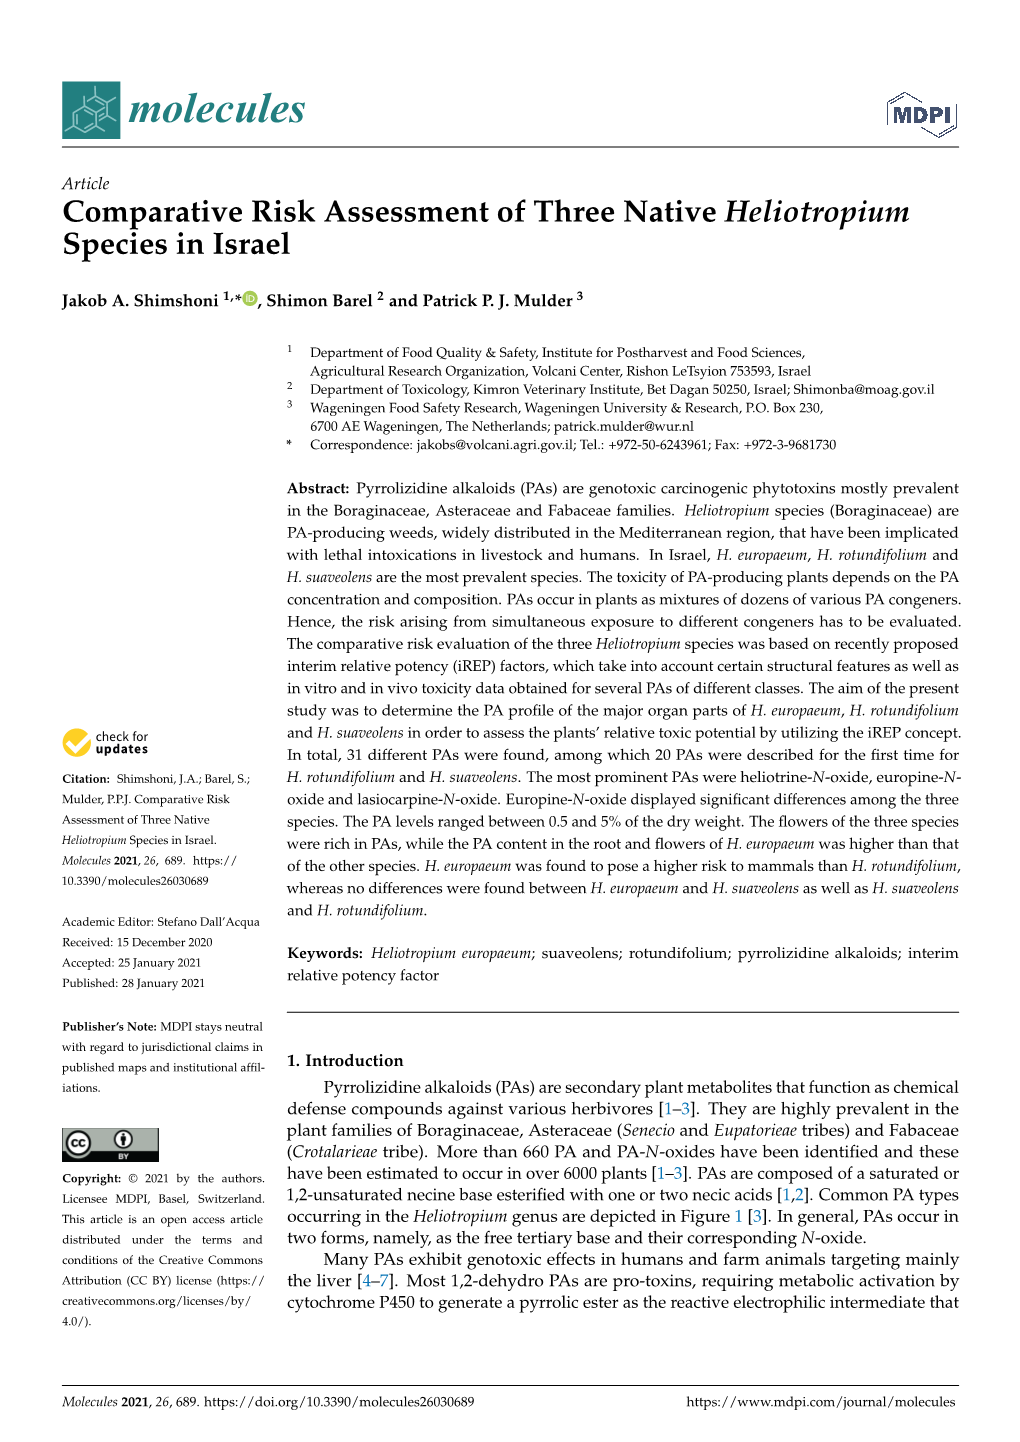 Comparative Risk Assessment of Three Native Heliotropium Species in Israel